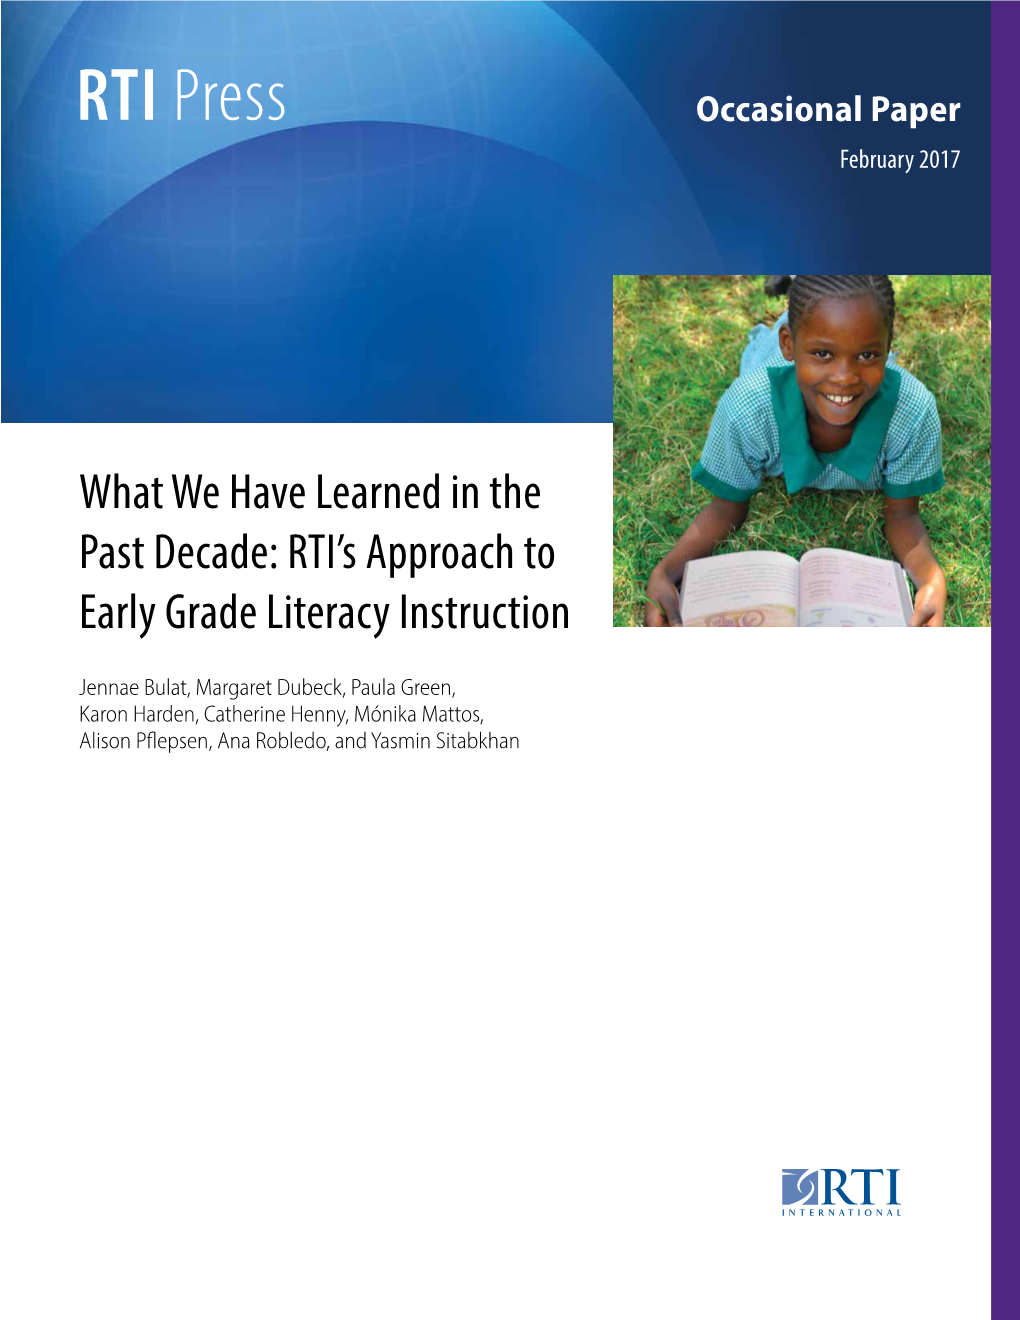 RTI's Approach to Early Grade Literay Instruction